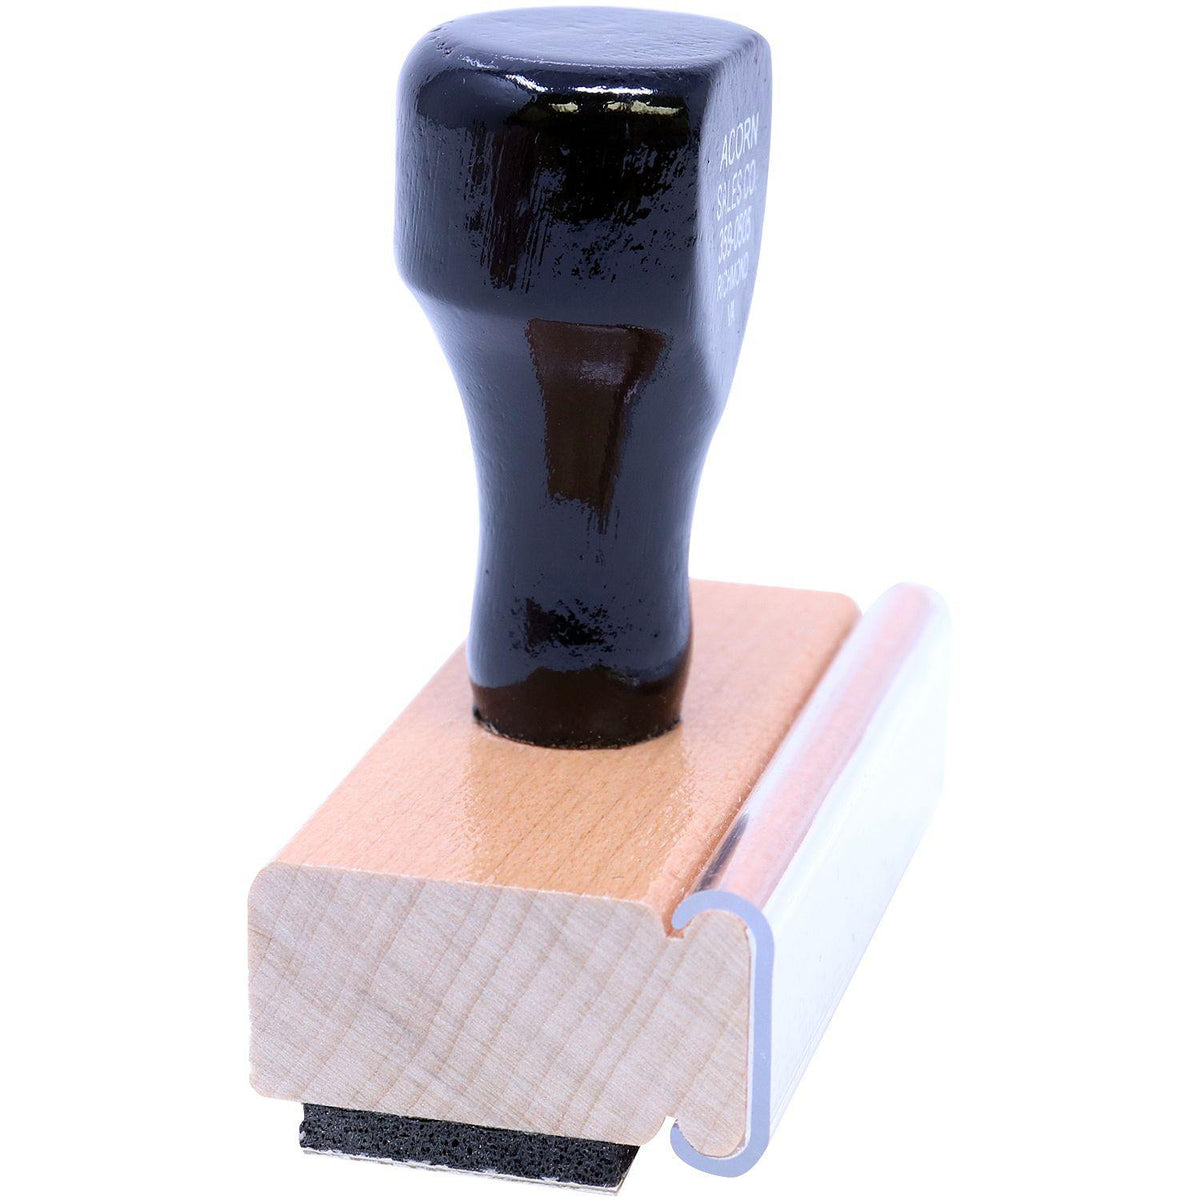 Side View of Social Distancing Rubber Stamp at an Angle